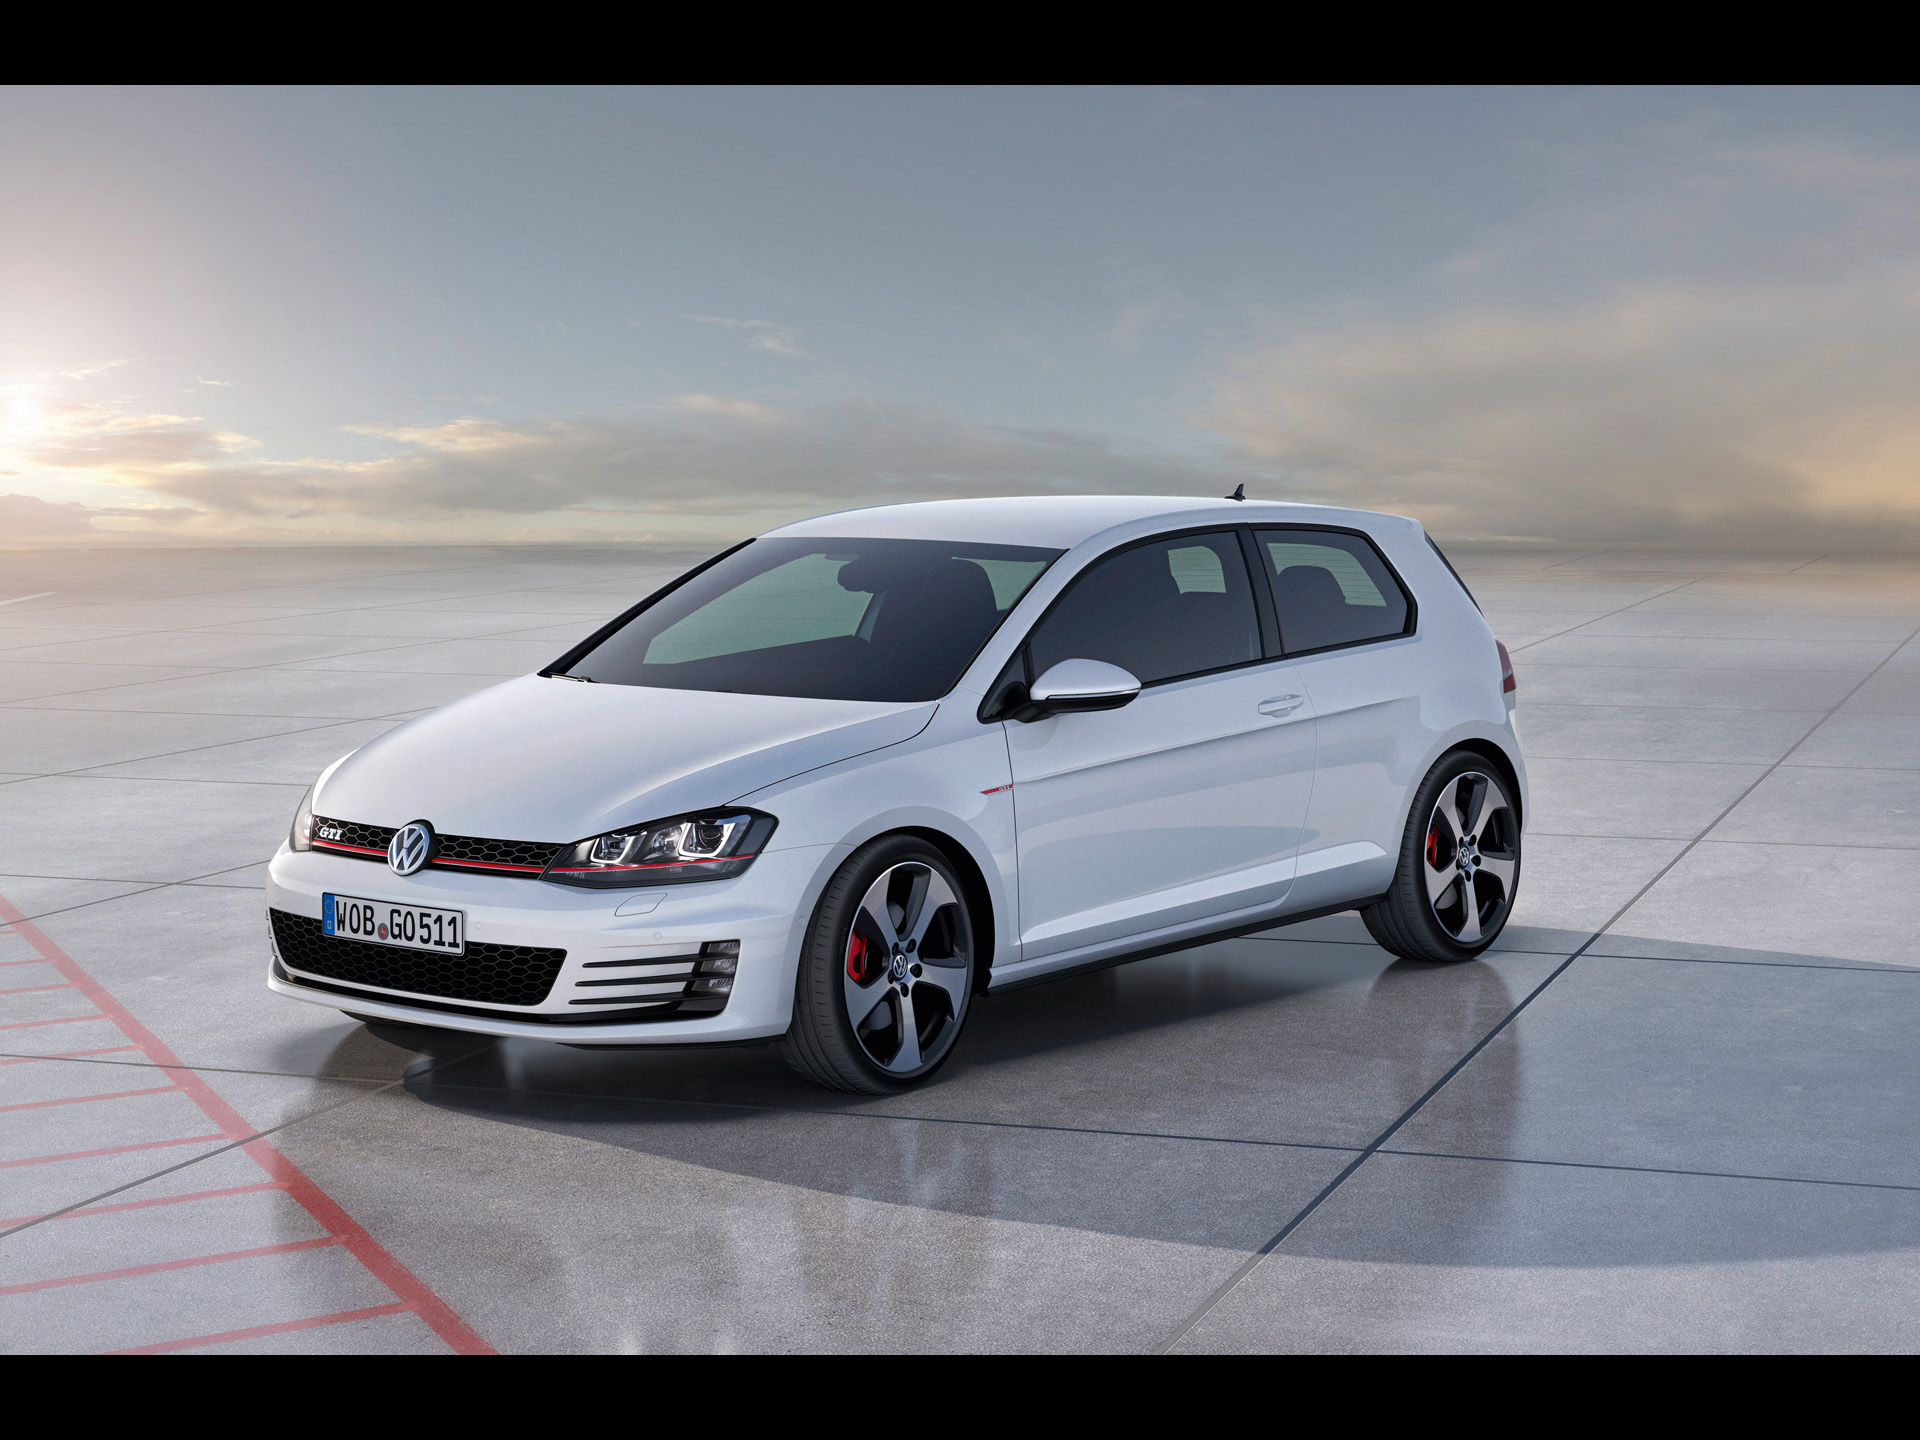 2012 volkswagen golf 7 gti concept static side angle wallpapers 35154 1920x1440